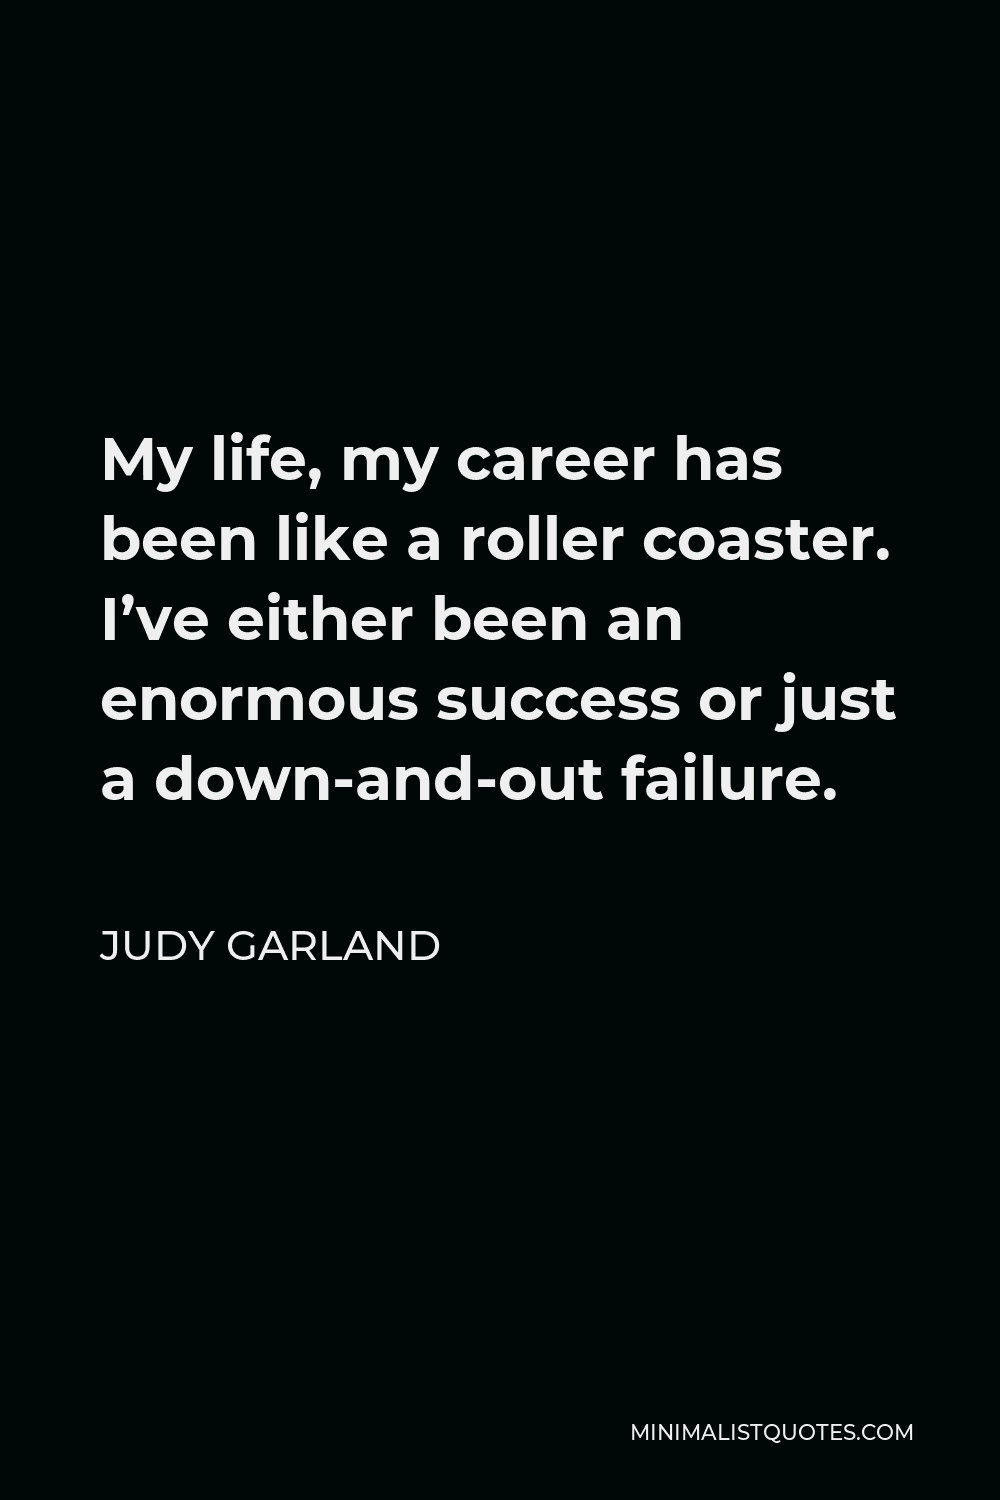 Judy Garland Quote - My life, my career has been like a roller coaster. I’ve either been an enormous success or just a down-and-out failure.